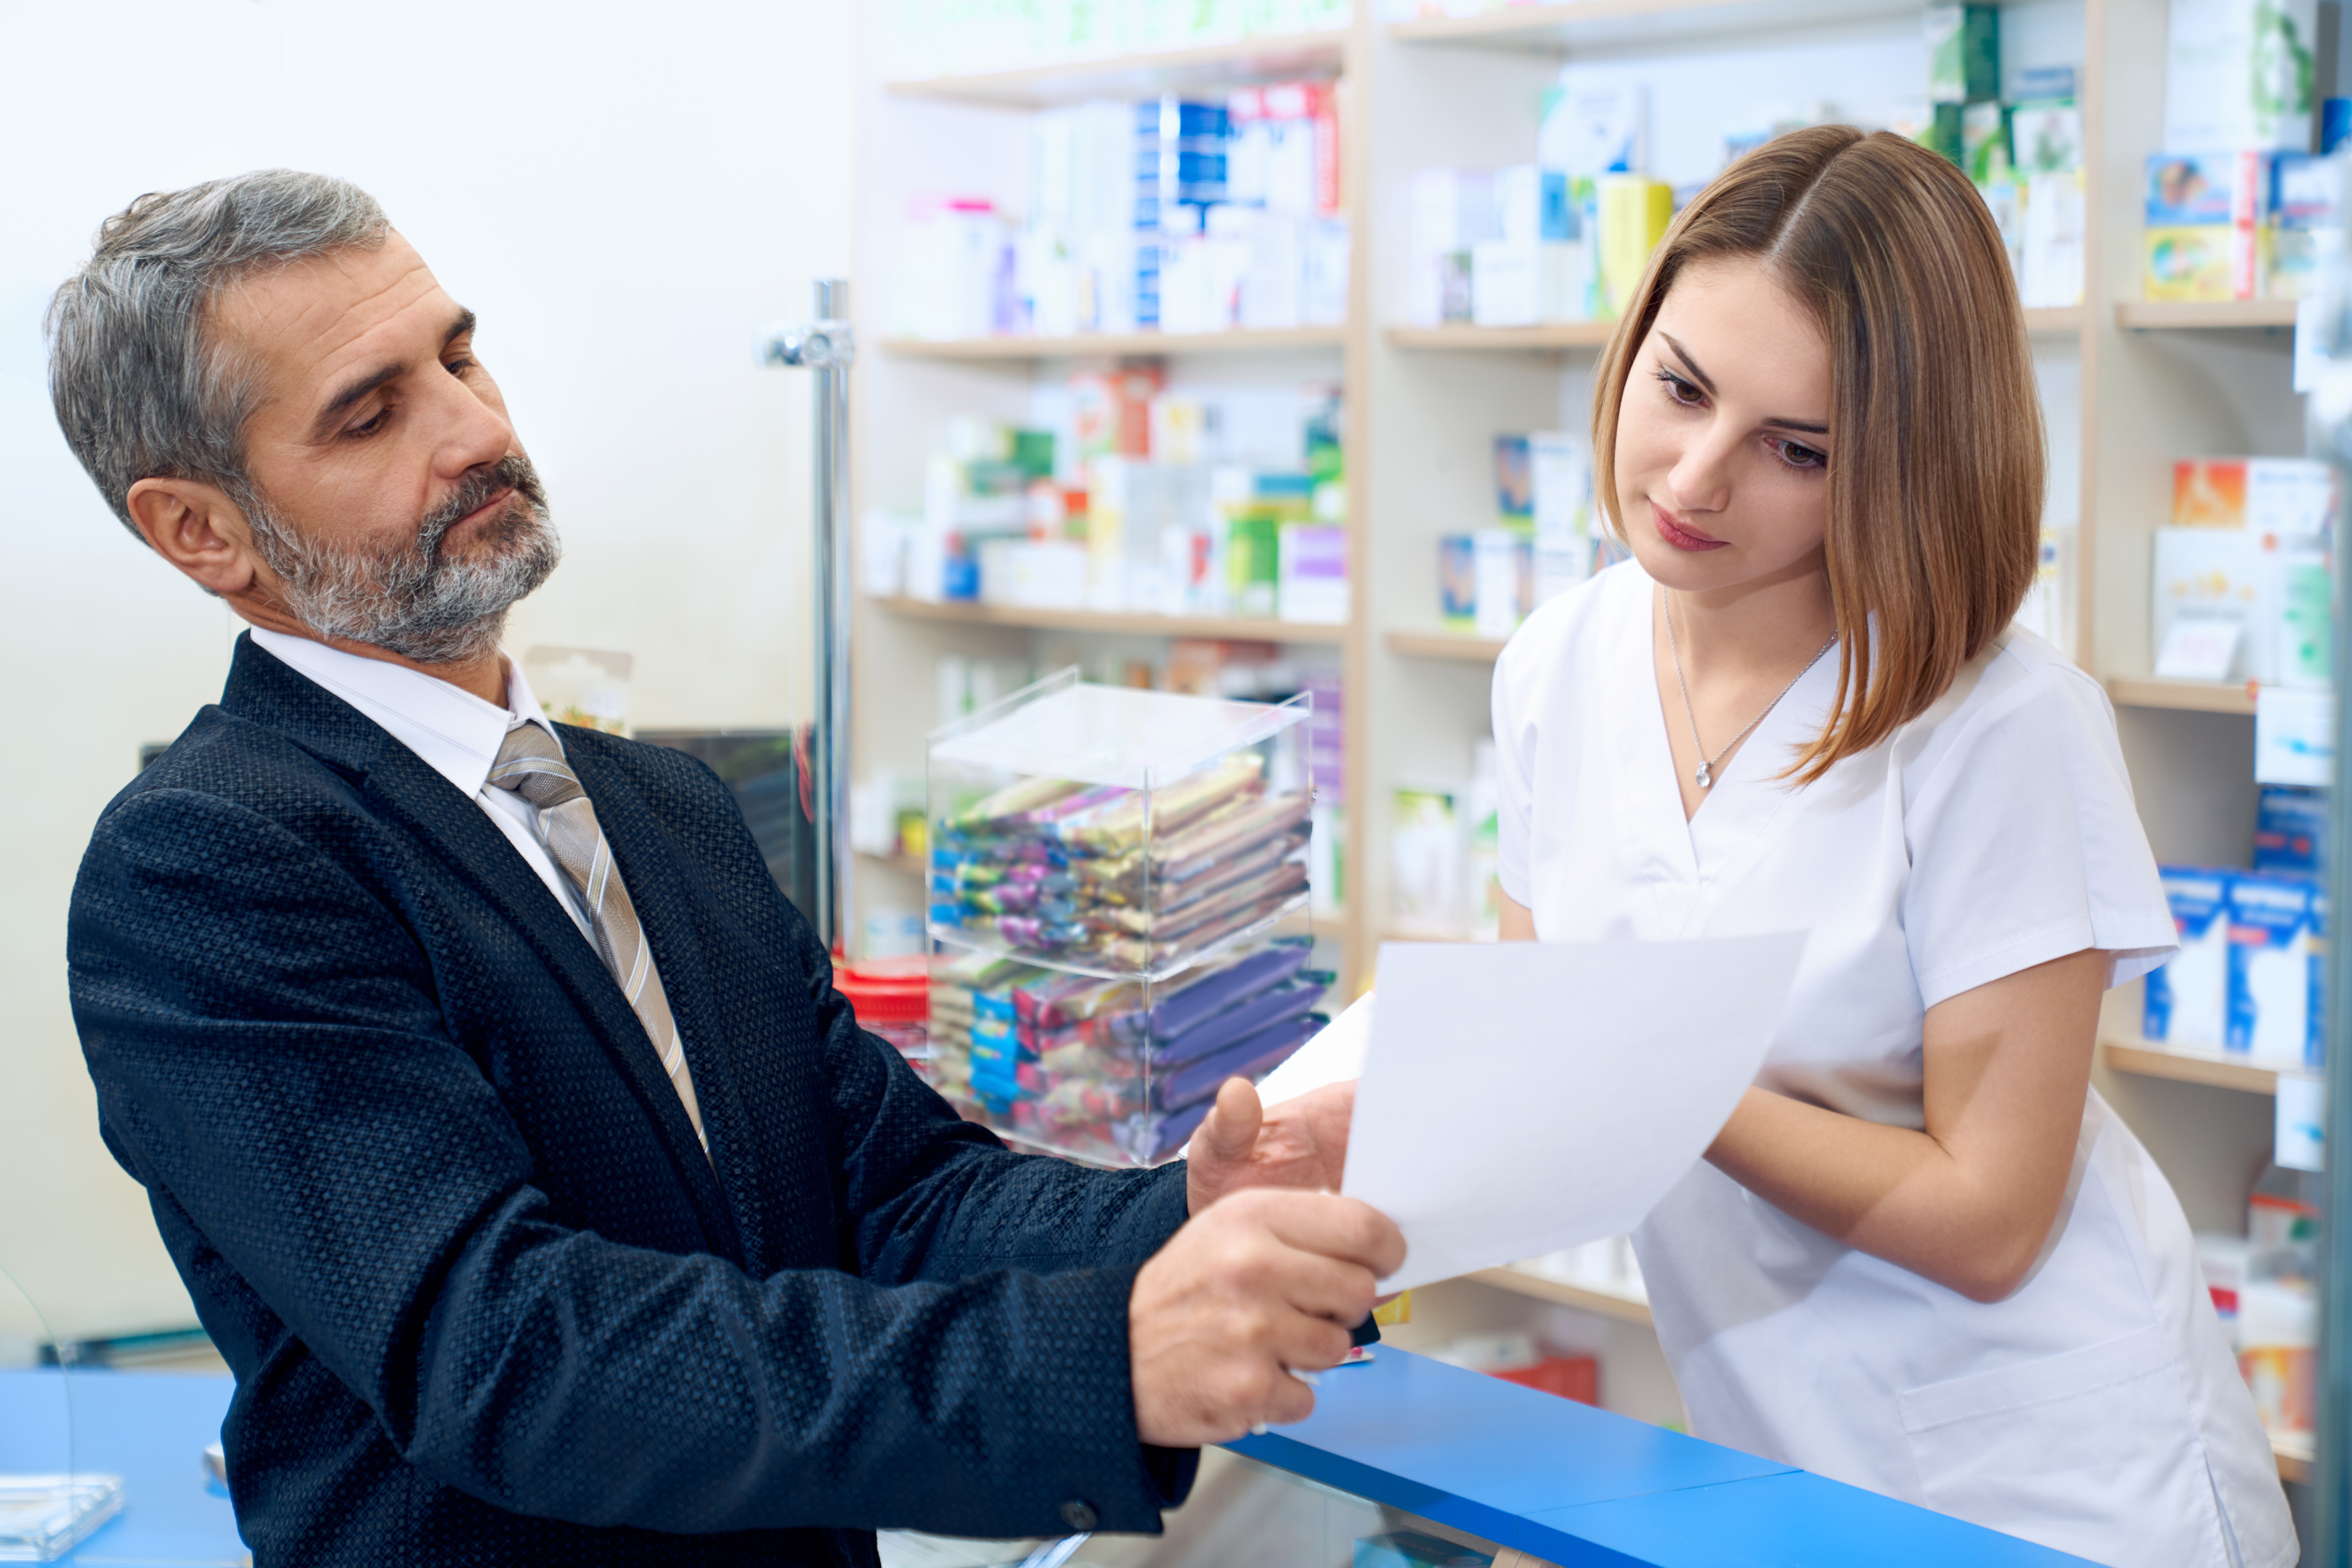 Consultation with the pharmacist will protect you from dangerous drug interactions.